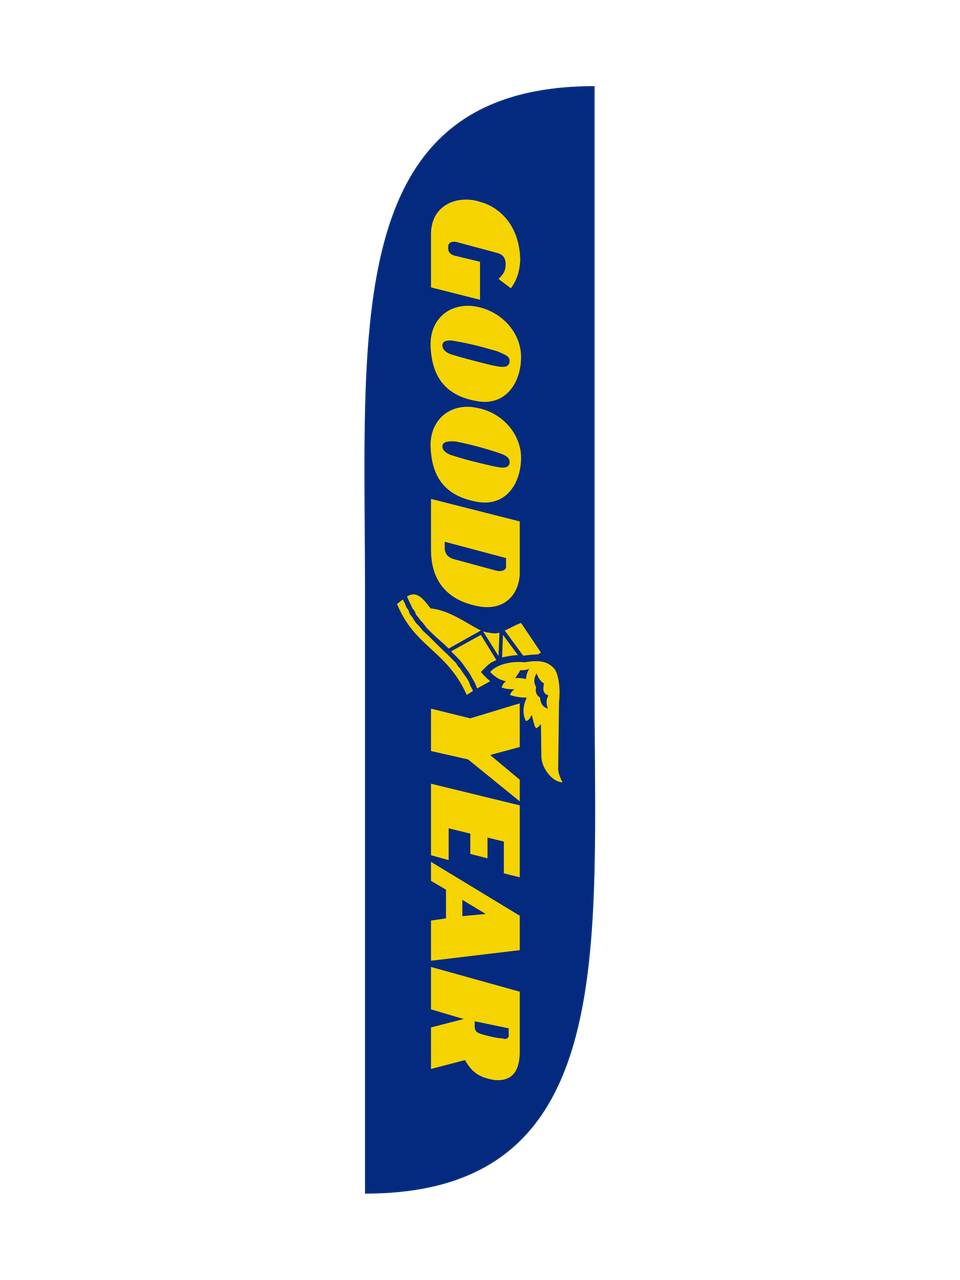 11ft Goodyear Tires Feather Flag